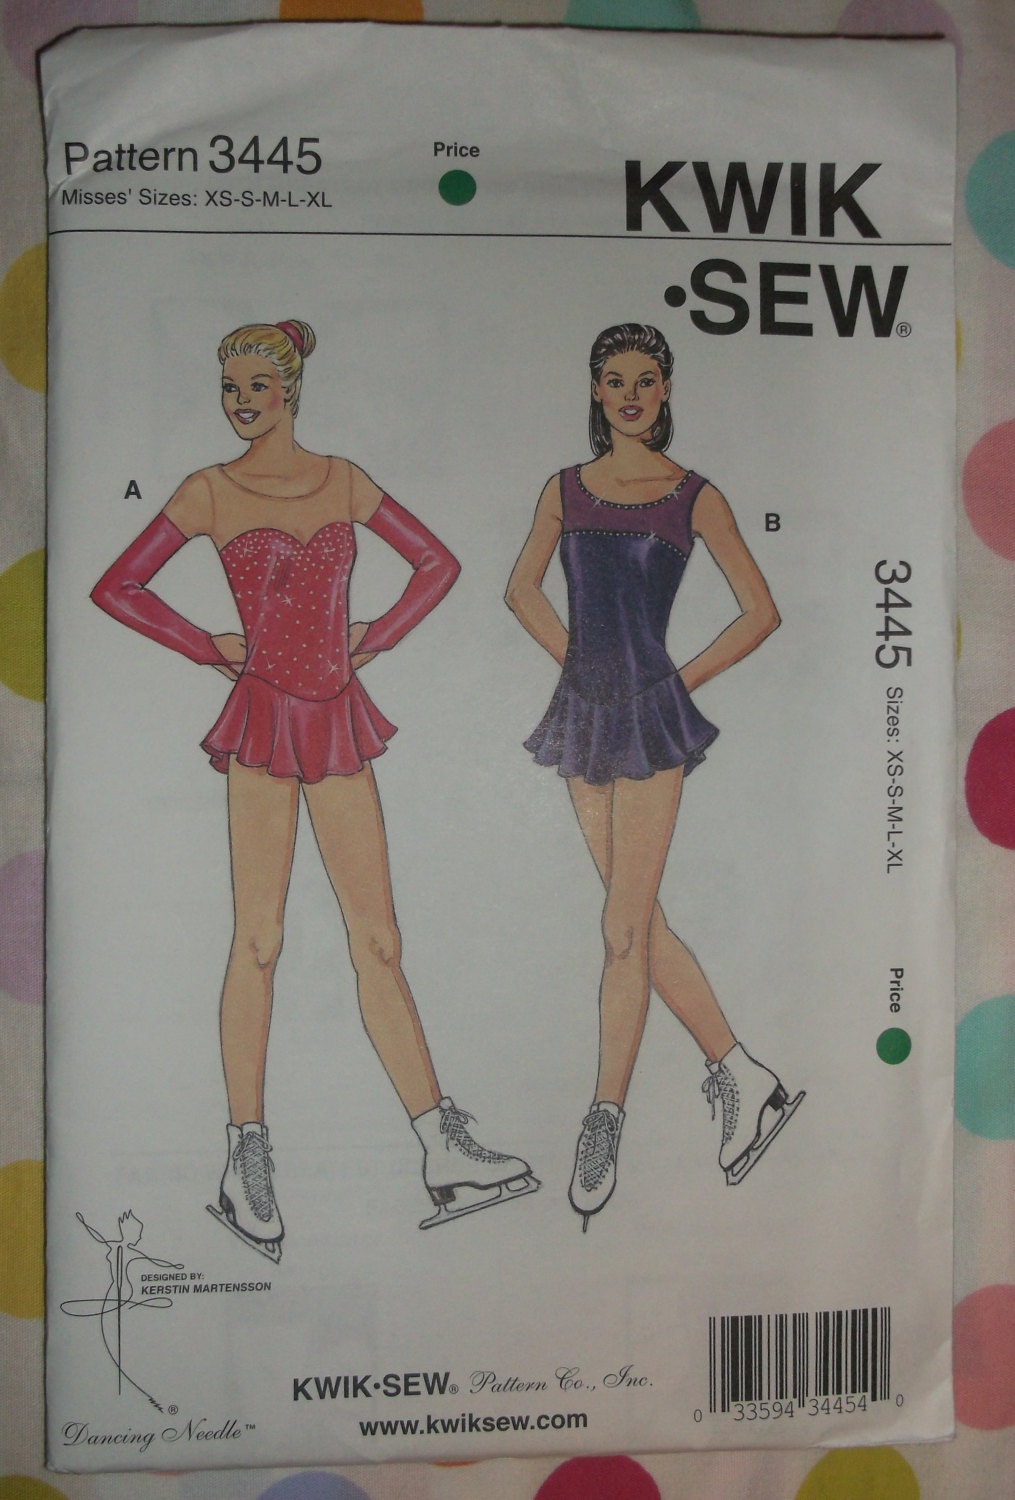 Awesome ladies Figure Skating Dress Pattern by MSNightsDream